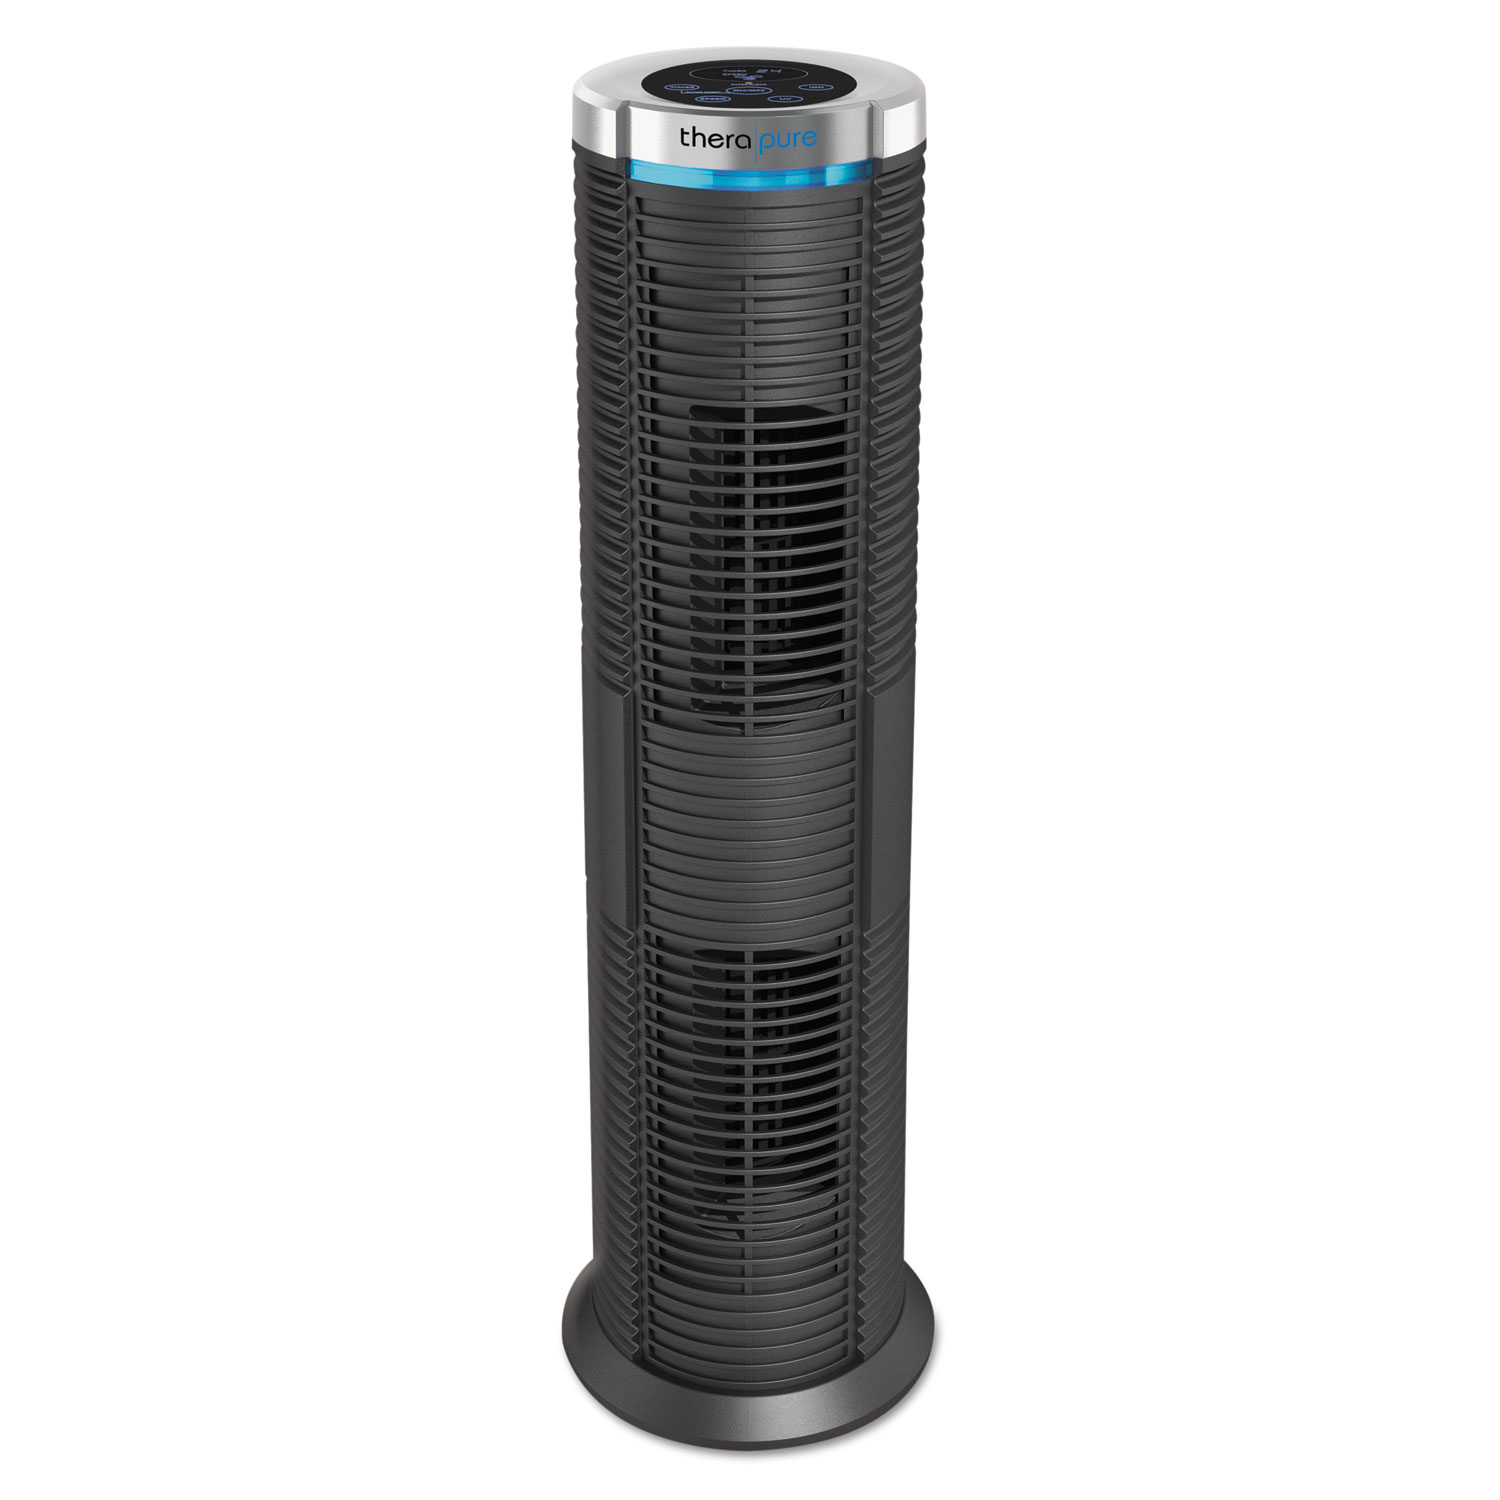 Therapure Tpp220M Hepa-Type Air Purifier: Experience Clean-Air Power